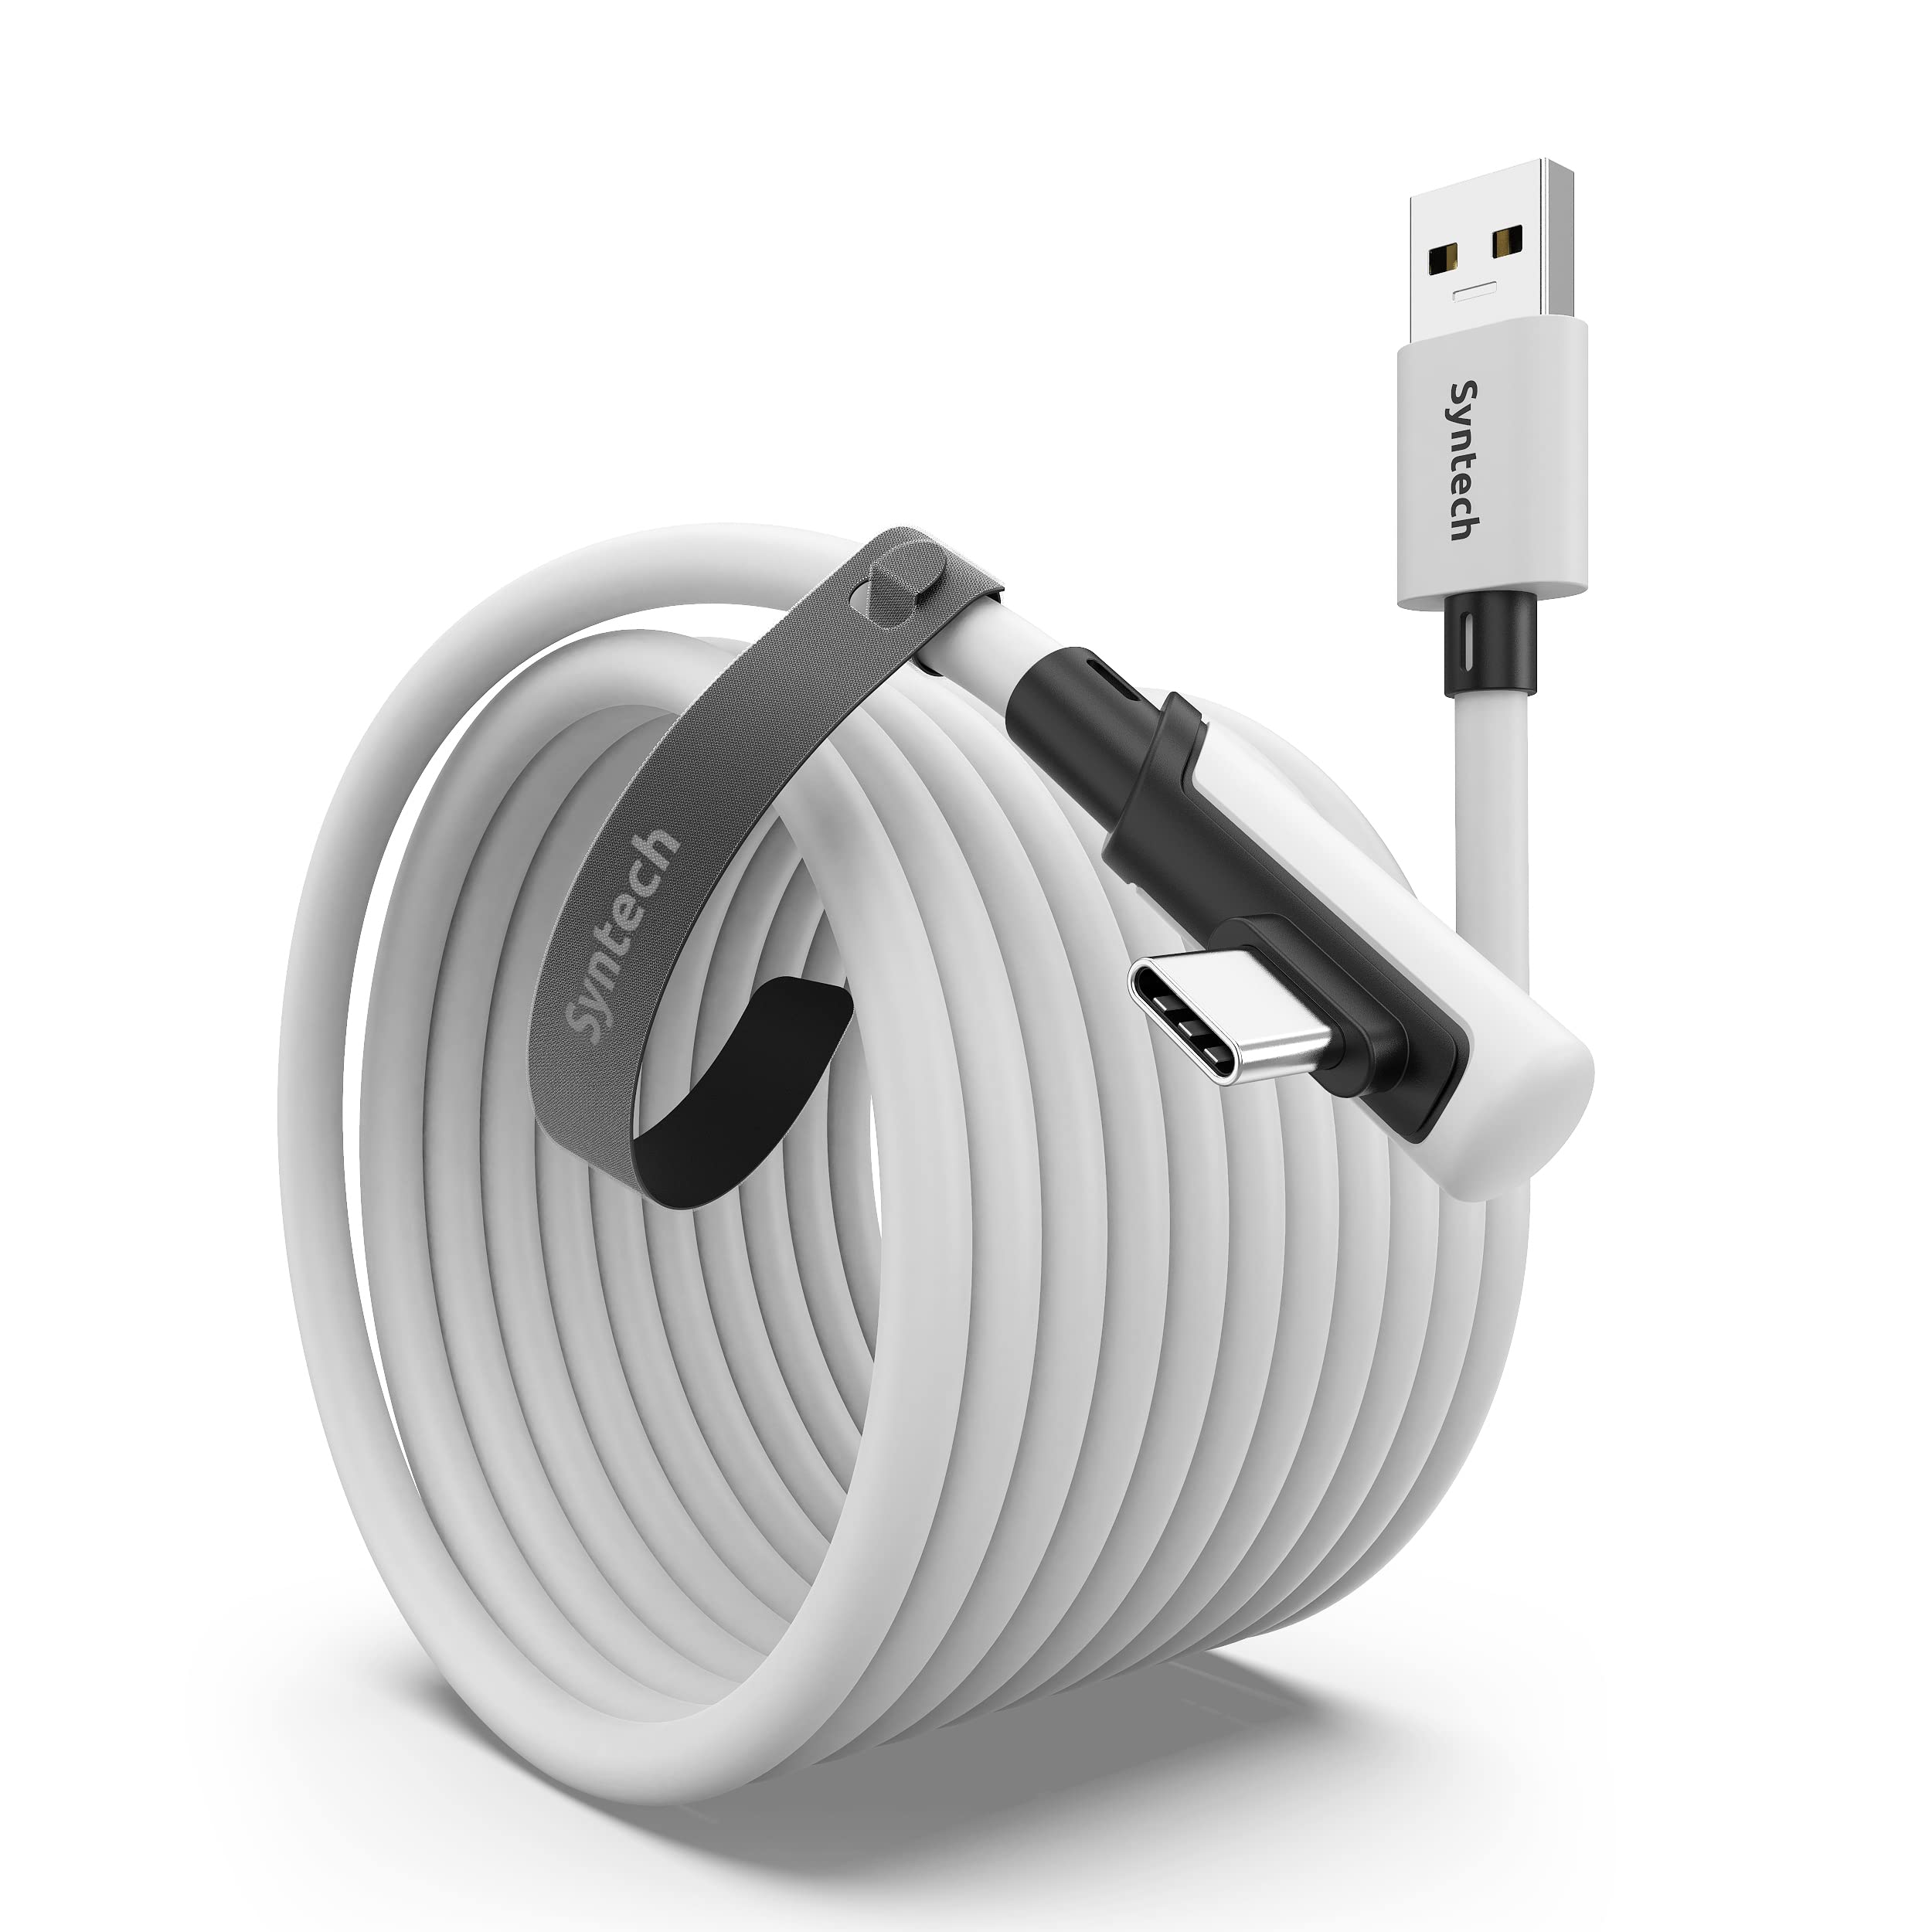 oculus linking cable